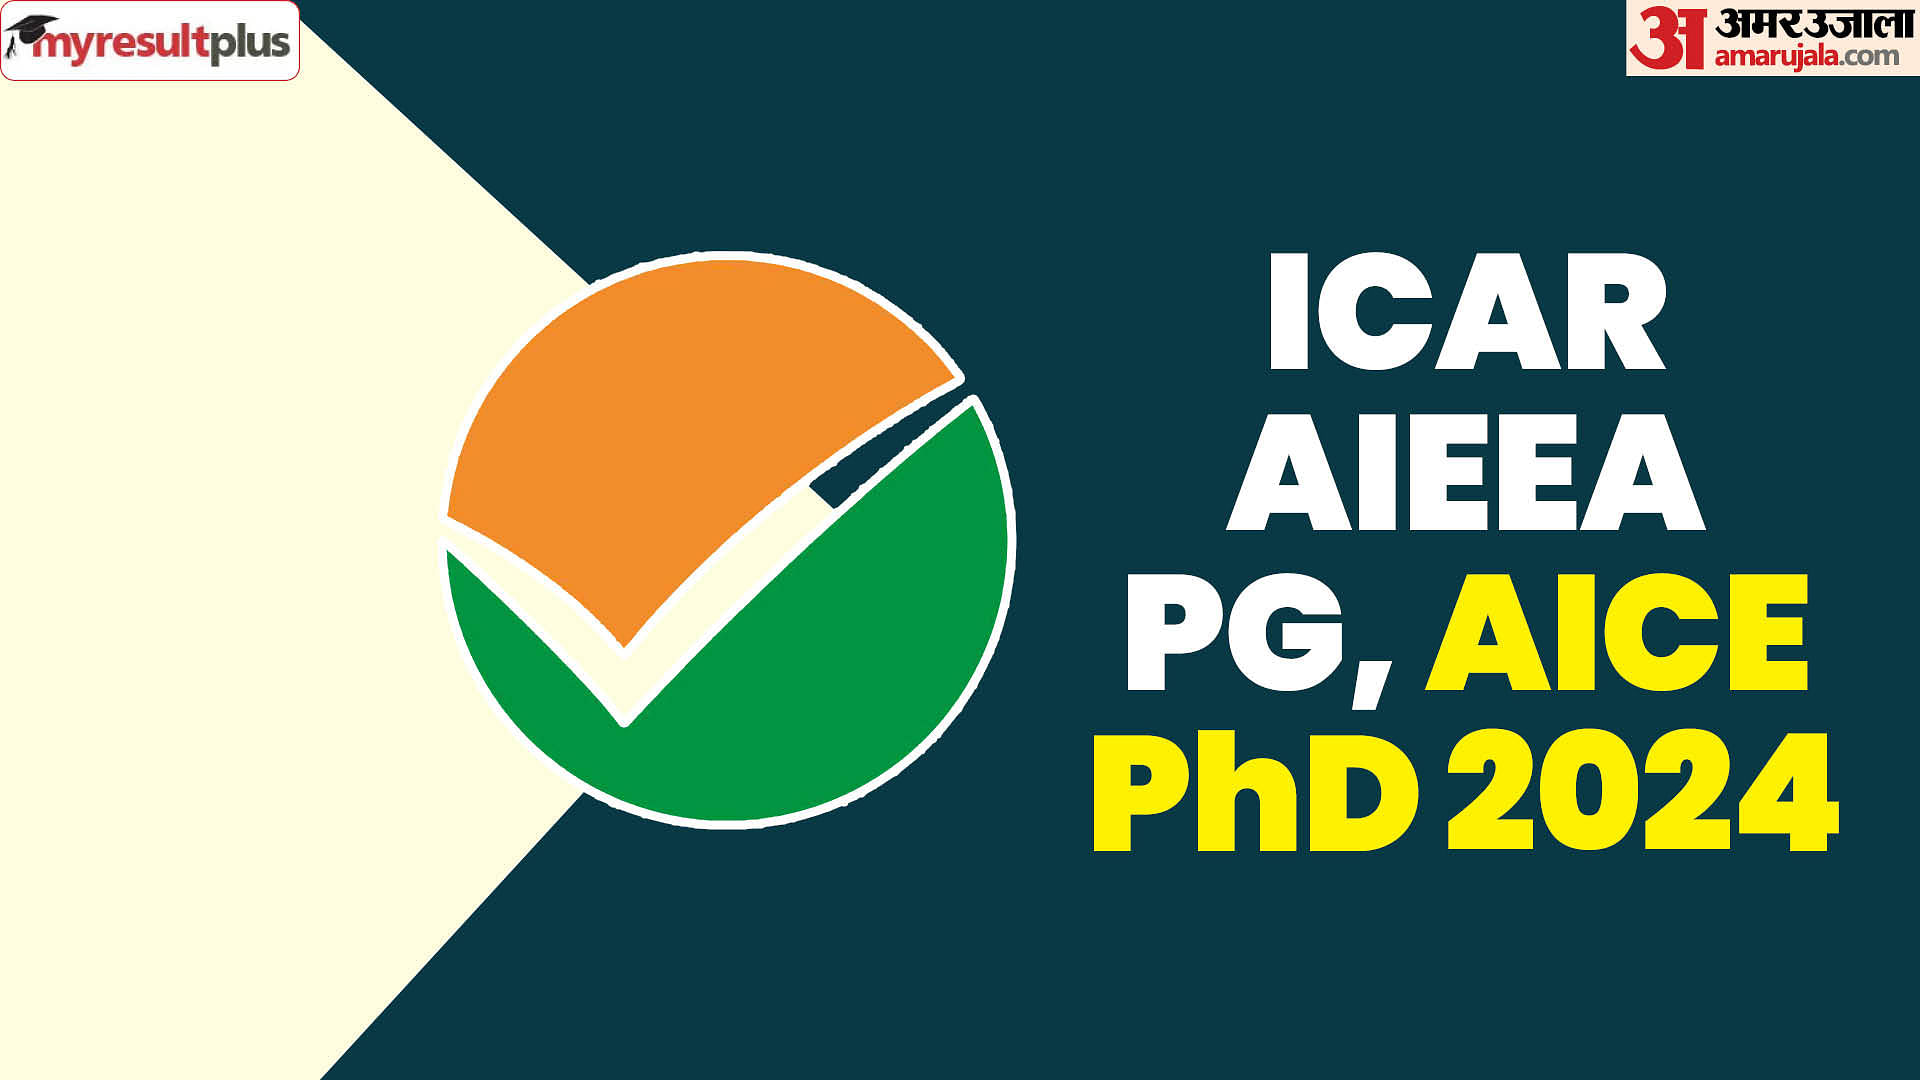 ICAR AIEEA PG, AICE PhD 2024 correction window closing tomorrow, Read the steps to make changes here